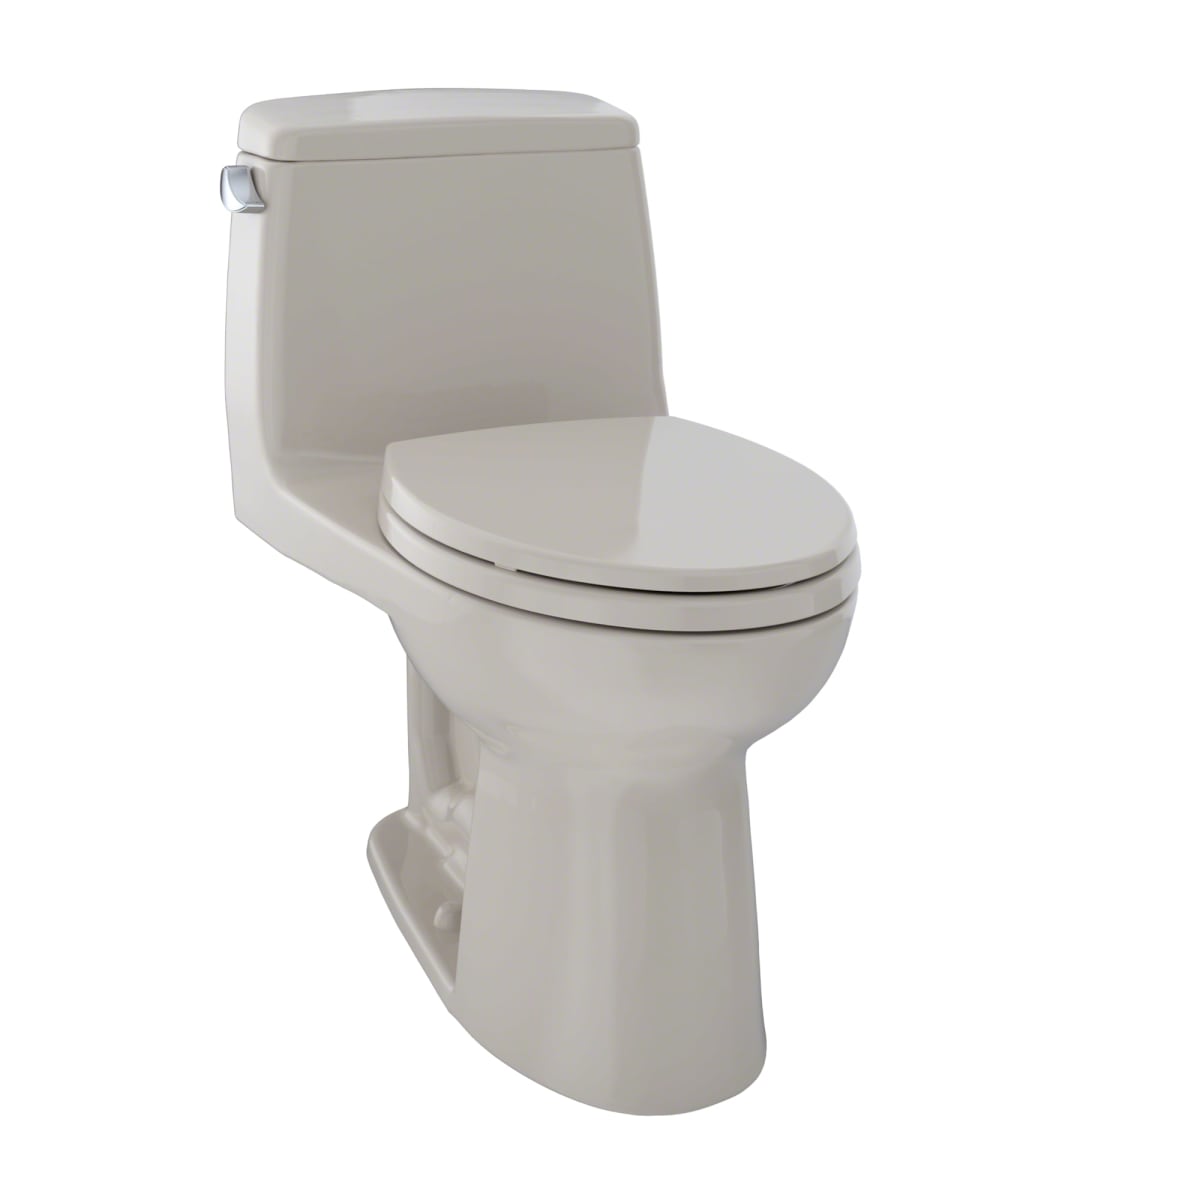 TOTO MS854114S#03 ULTRAMAX ONE PIECE ELONGATED 1.6 GPF TOILET WITH G-MAX FLUSH SYSTEM - SOFTCLOSE SEAT INCLUDED